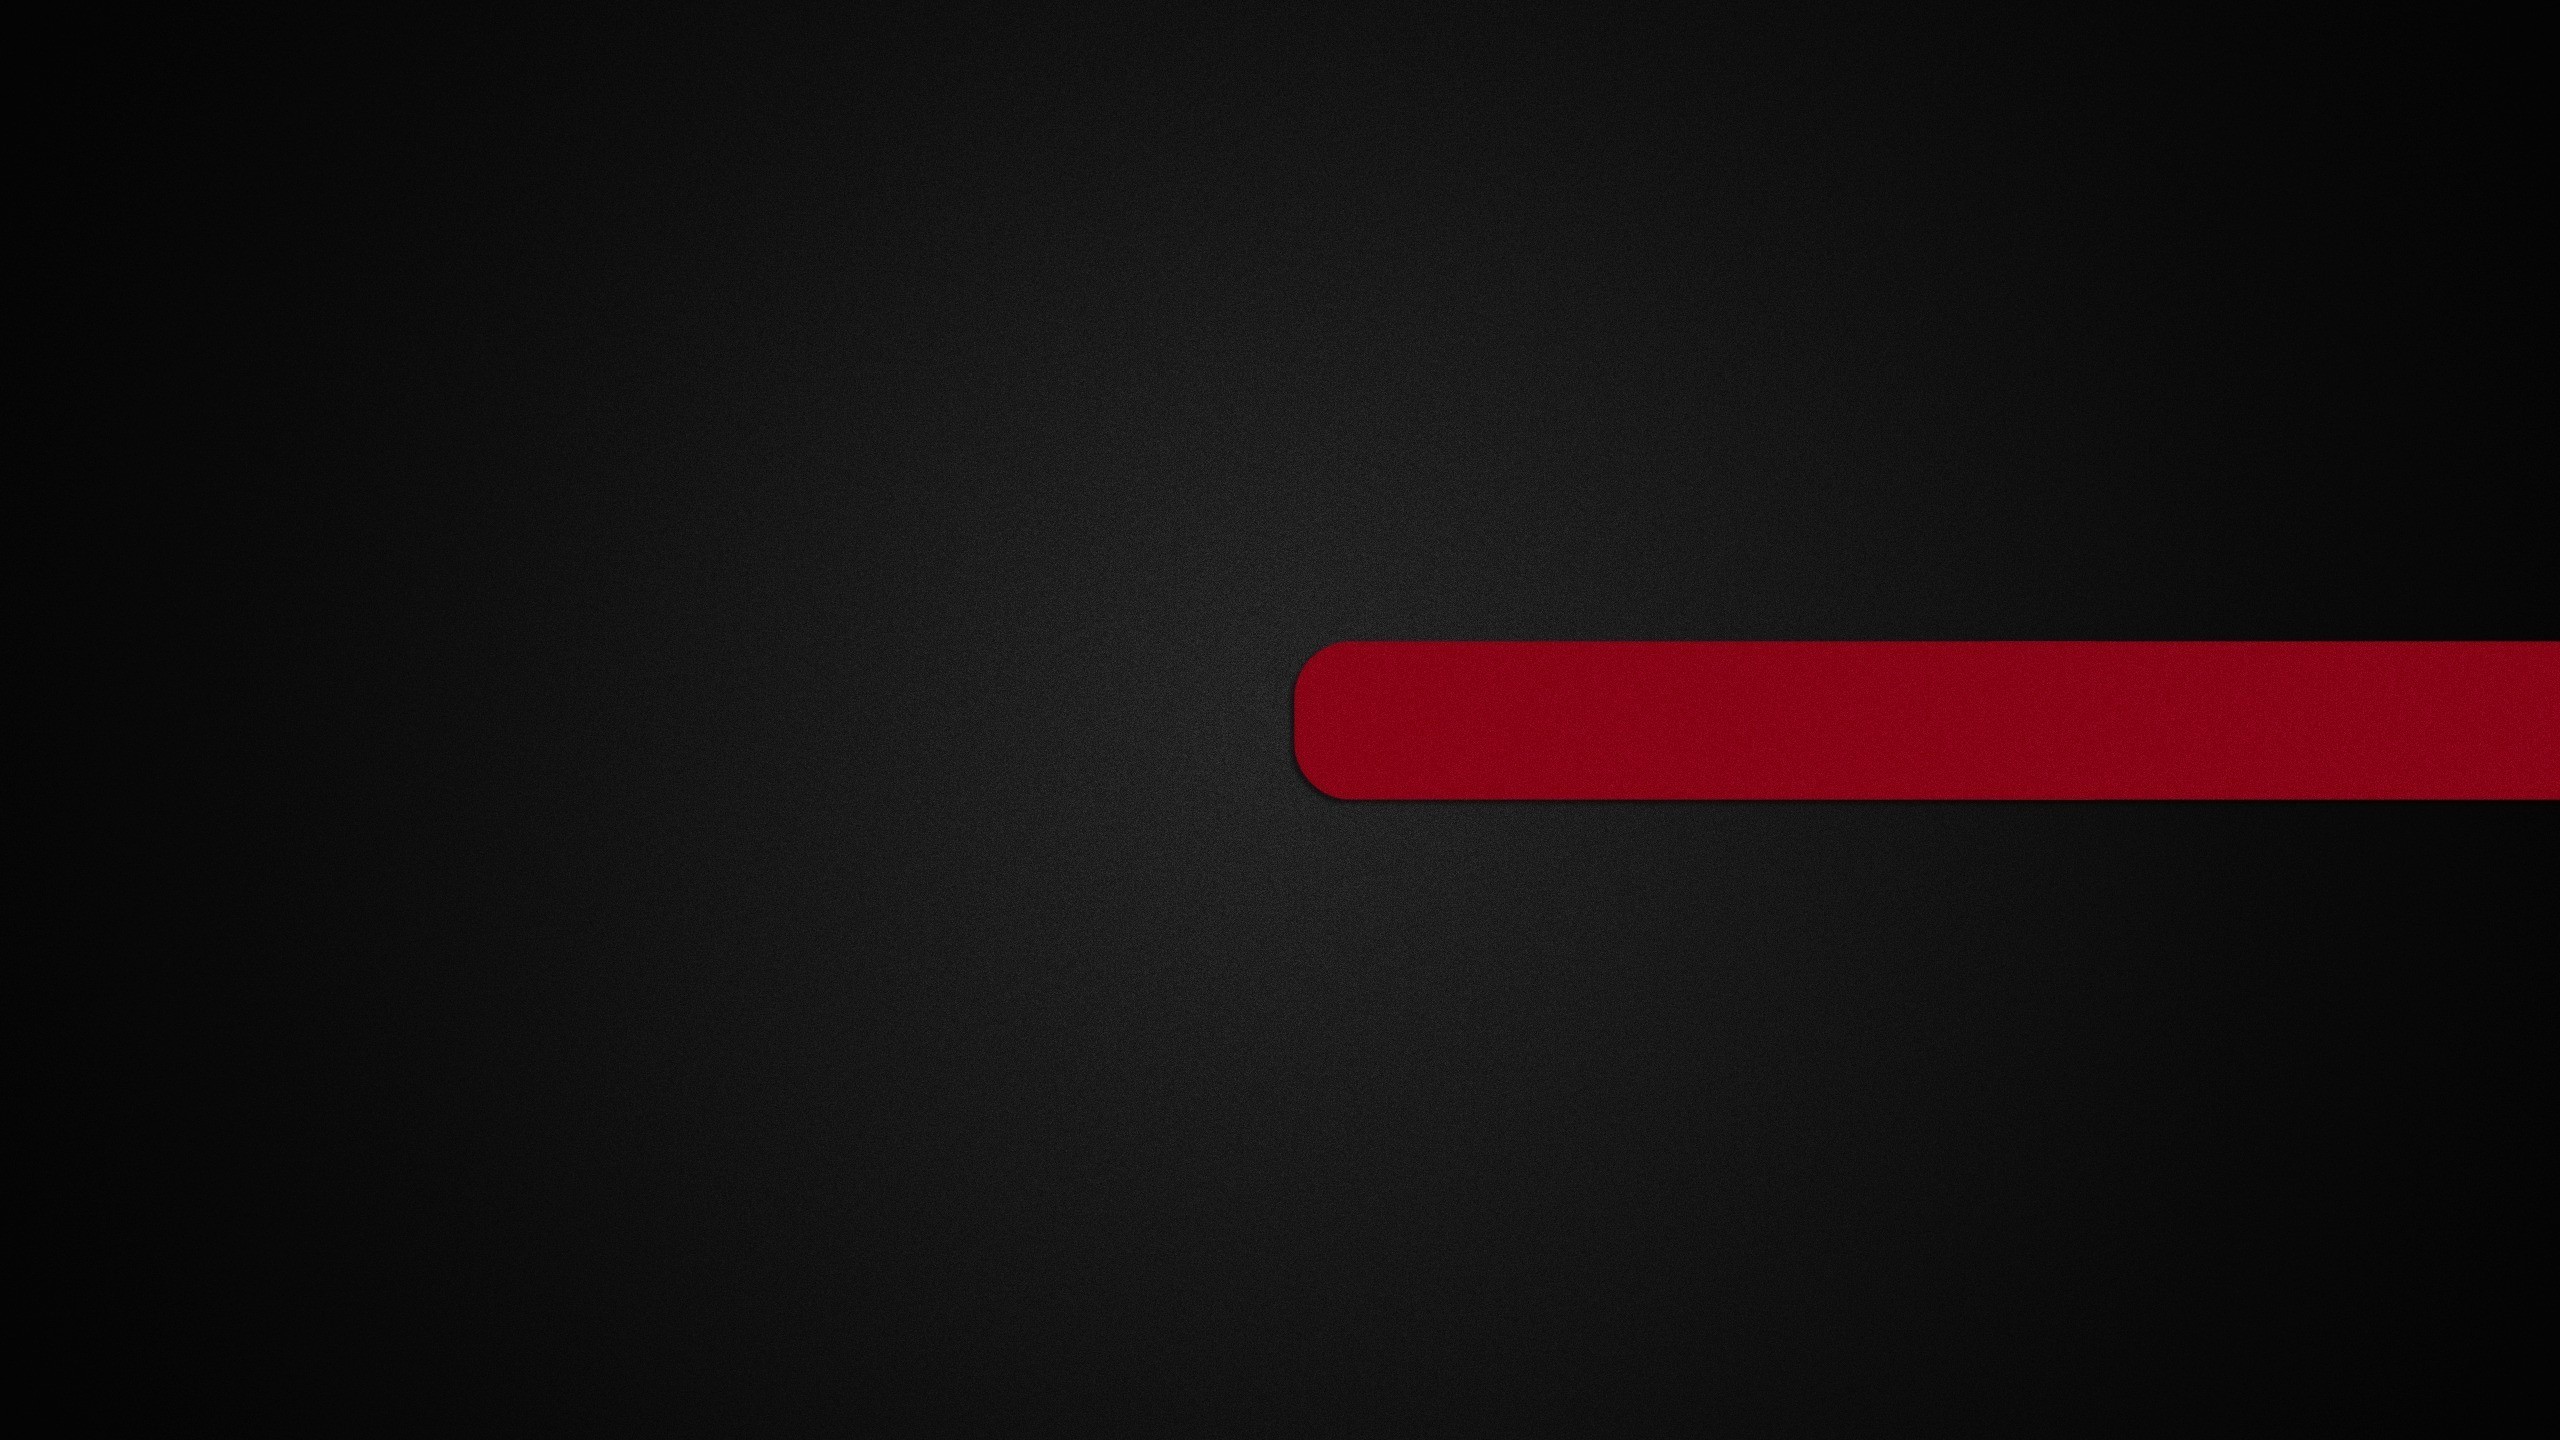 The post Black Abstract Wallpaper HD appeared first on HD Wallpaper